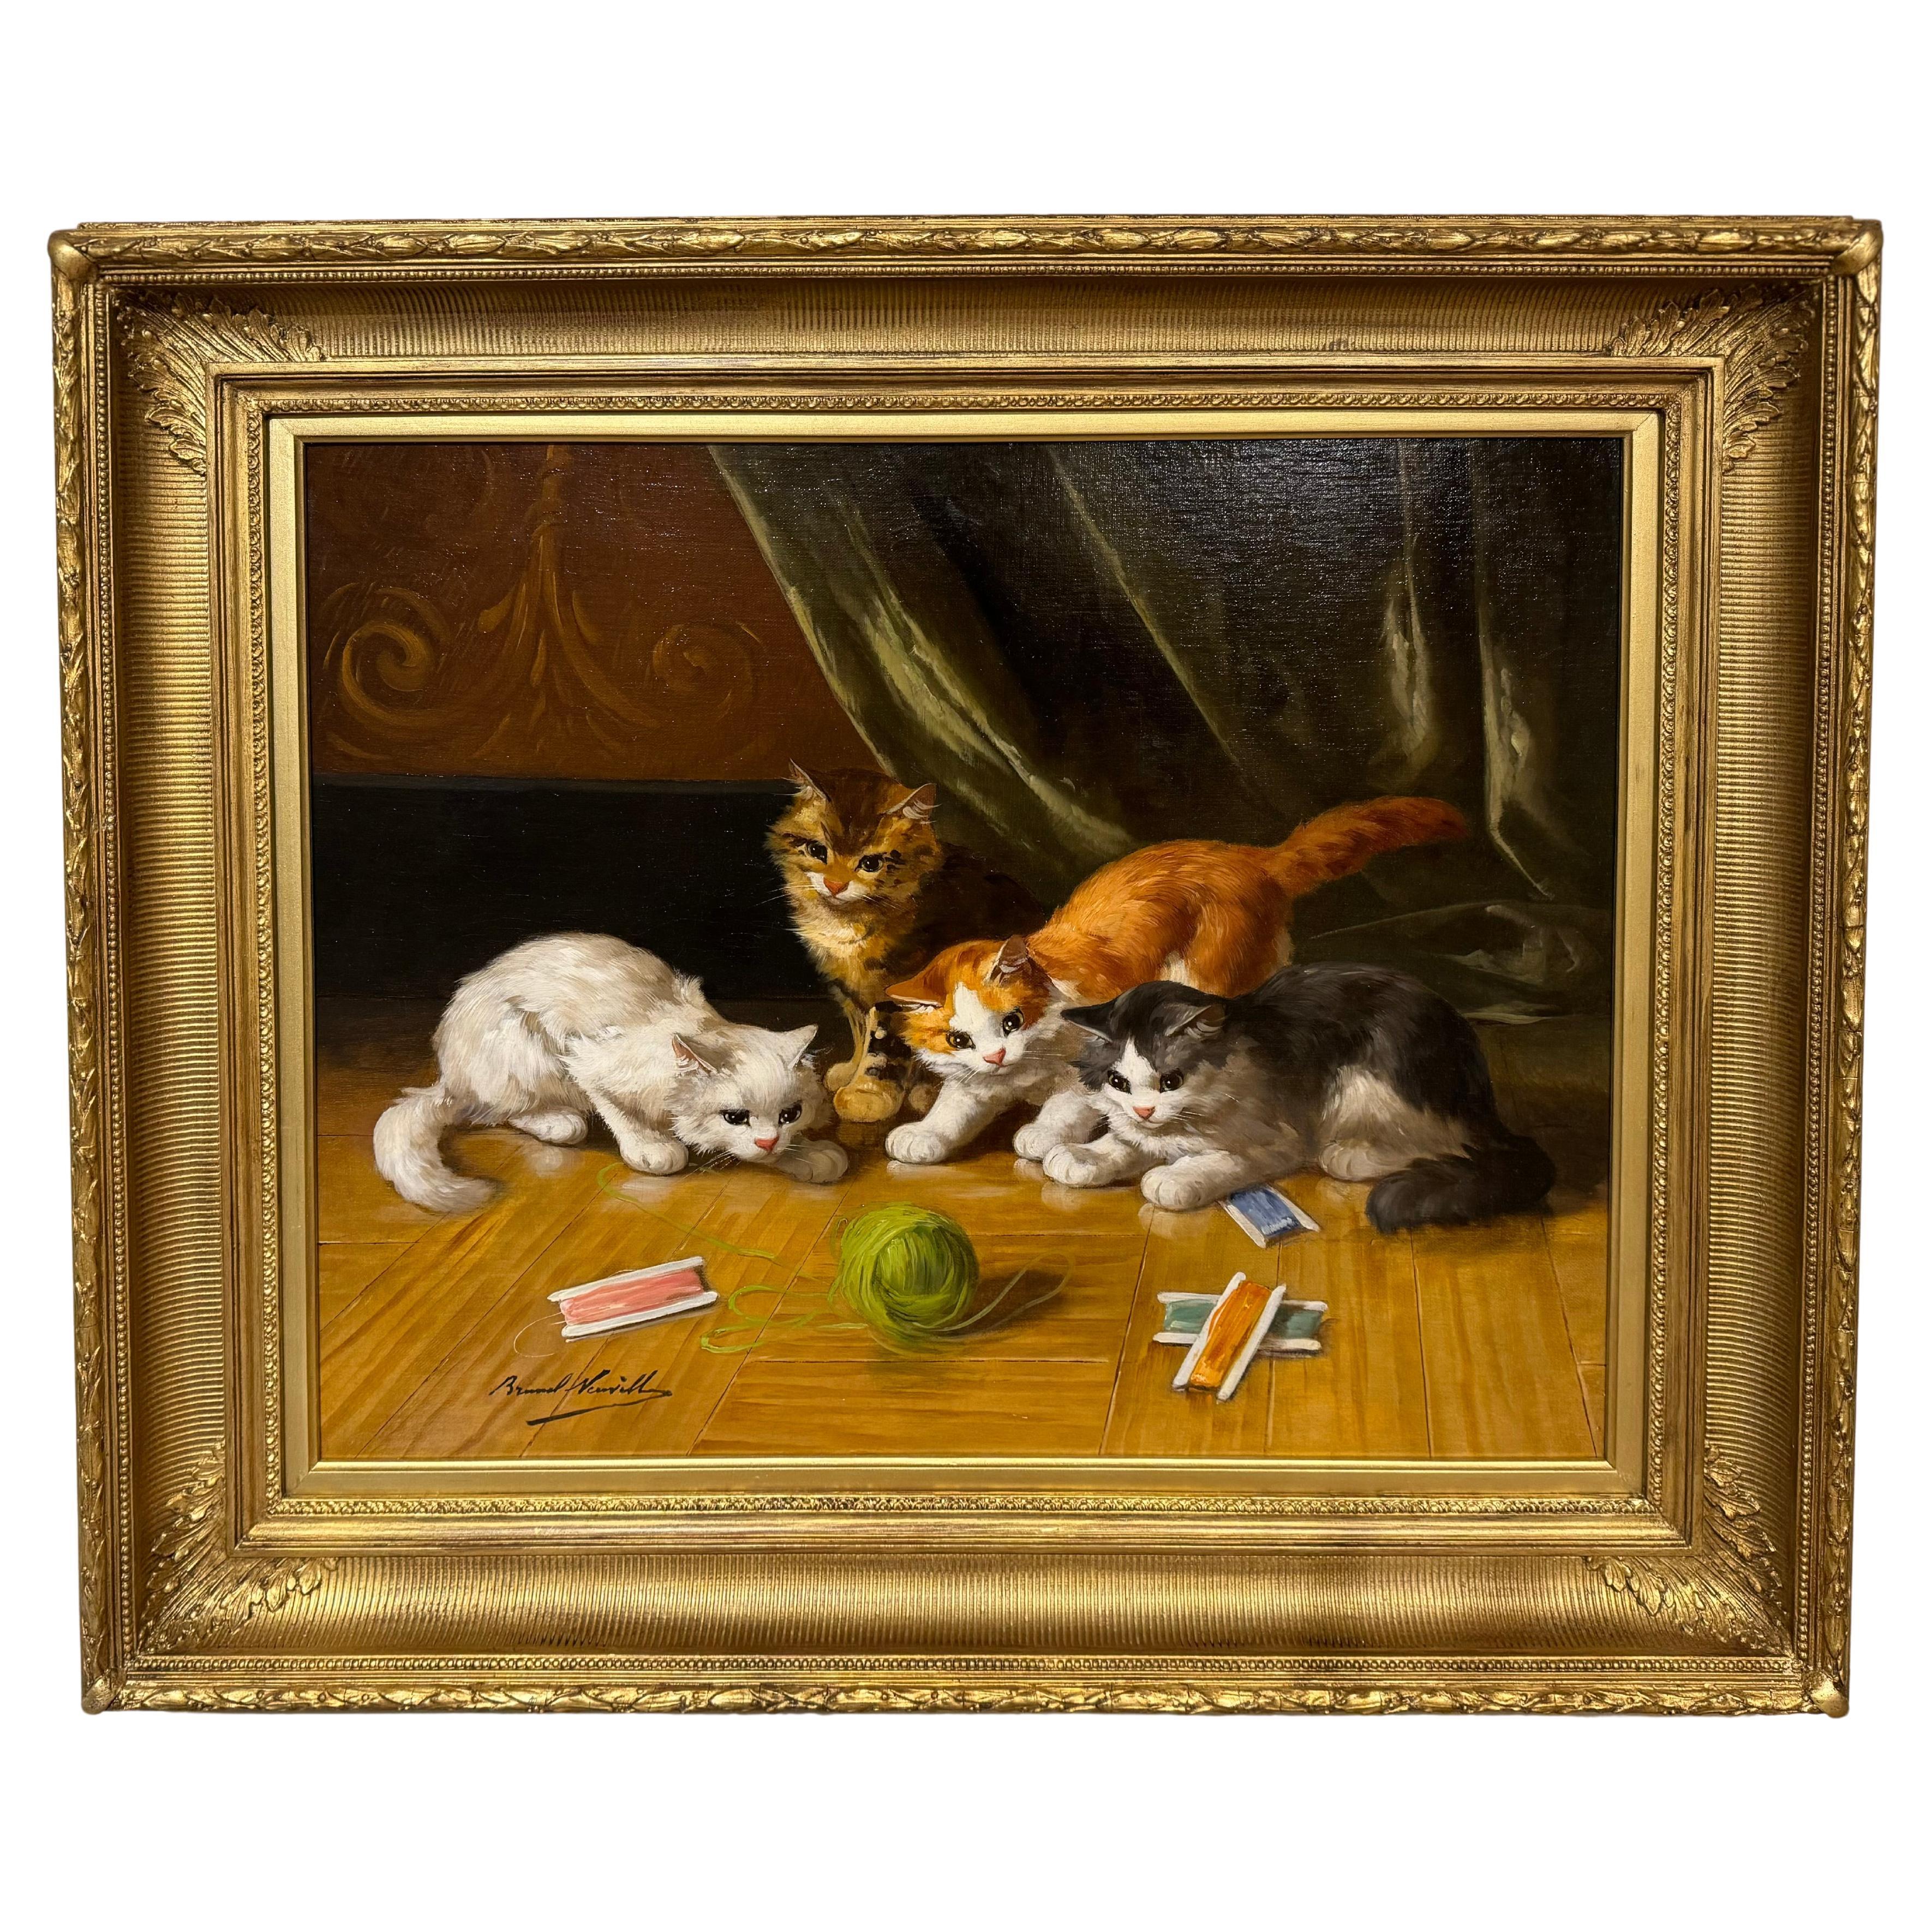 c.1900 Oil on Canvas ‘Kittens at play’ by AA Brunel de Neuville 